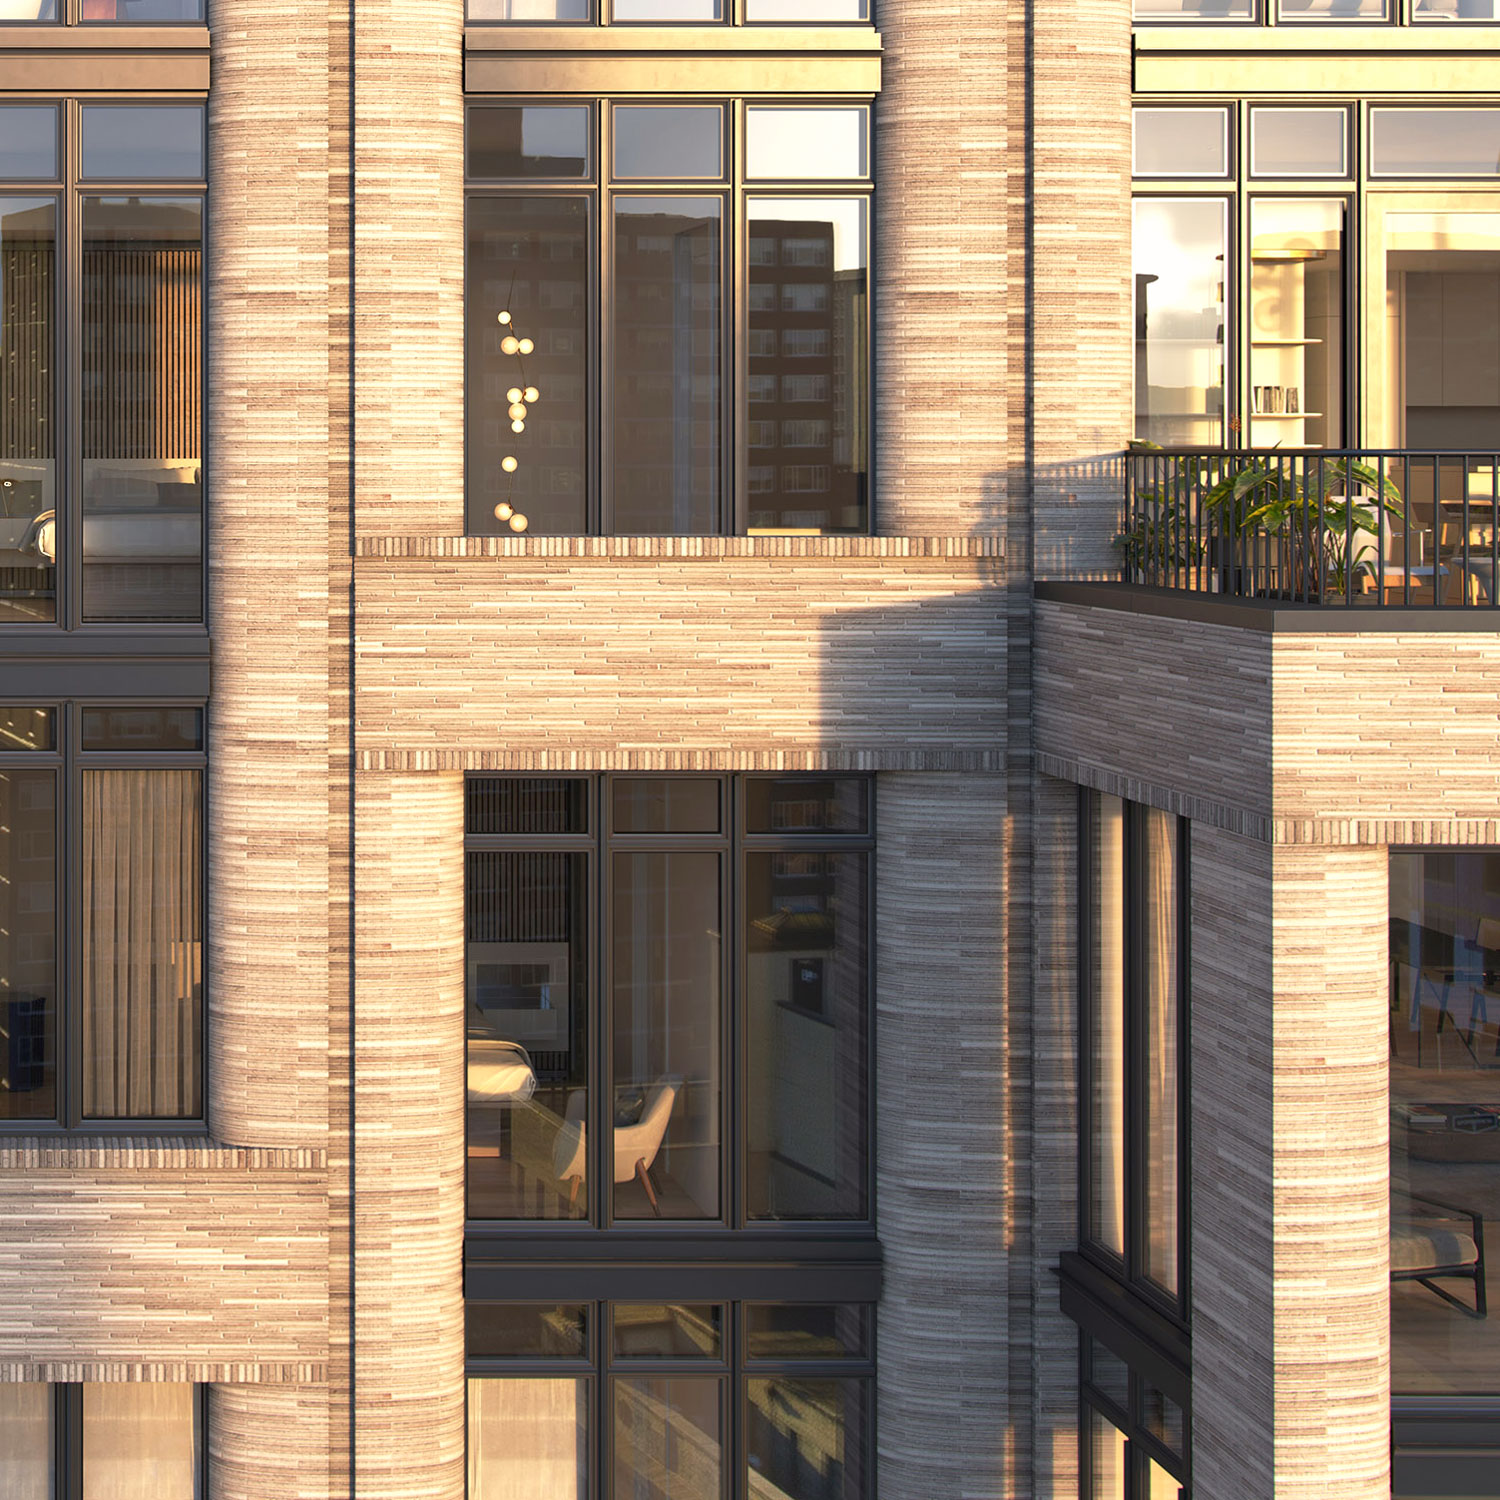 Architectural Rendering of the exterior of the 2505 Broadway building project located on the Upper West Side in New York City